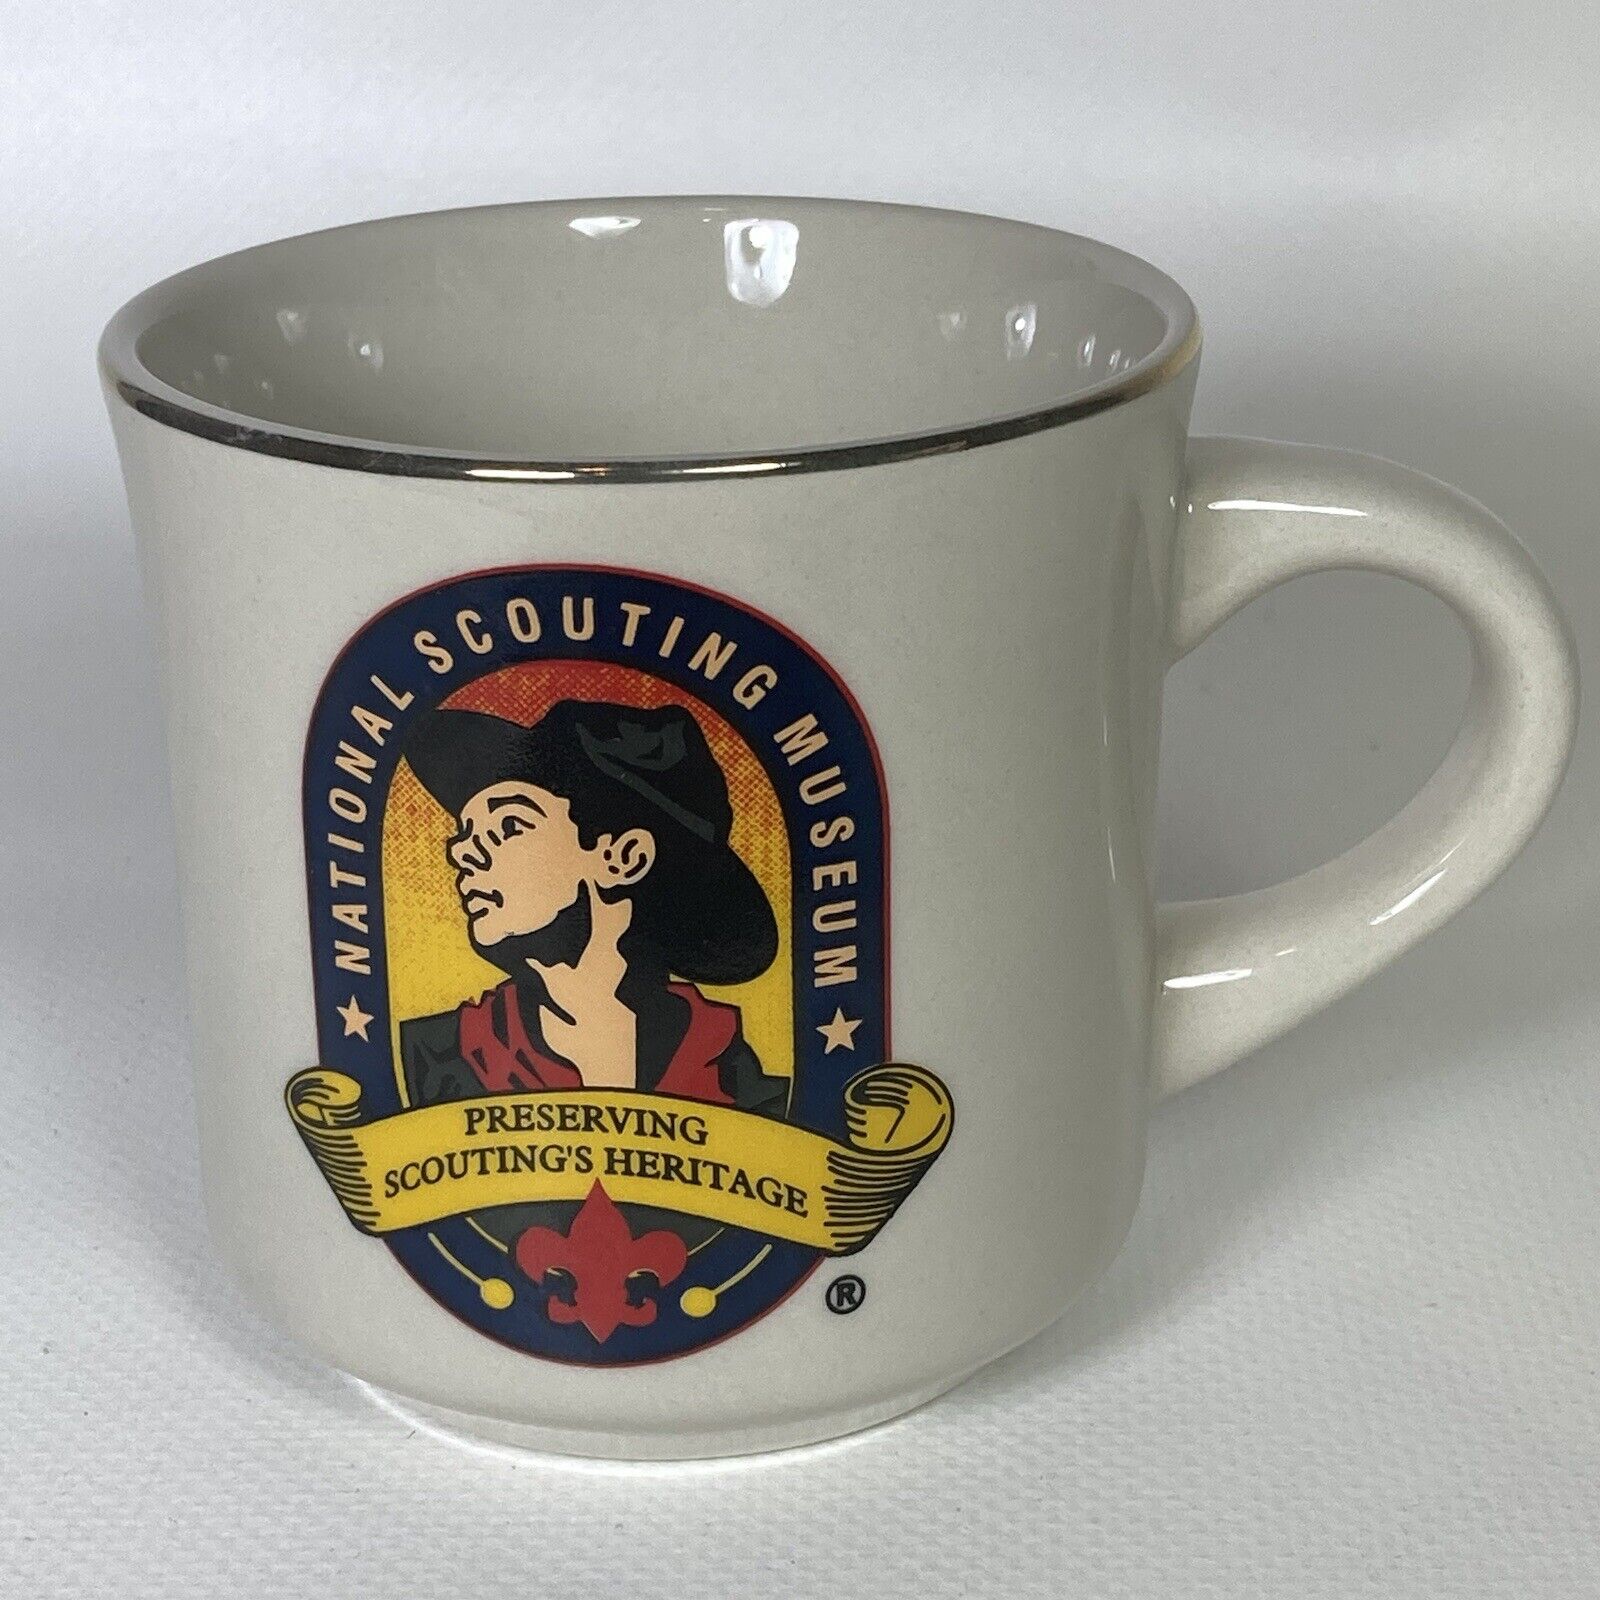 VTG Boy Scout Coffee Mug Cup National Scouting Museum Preserving Heritage Logo